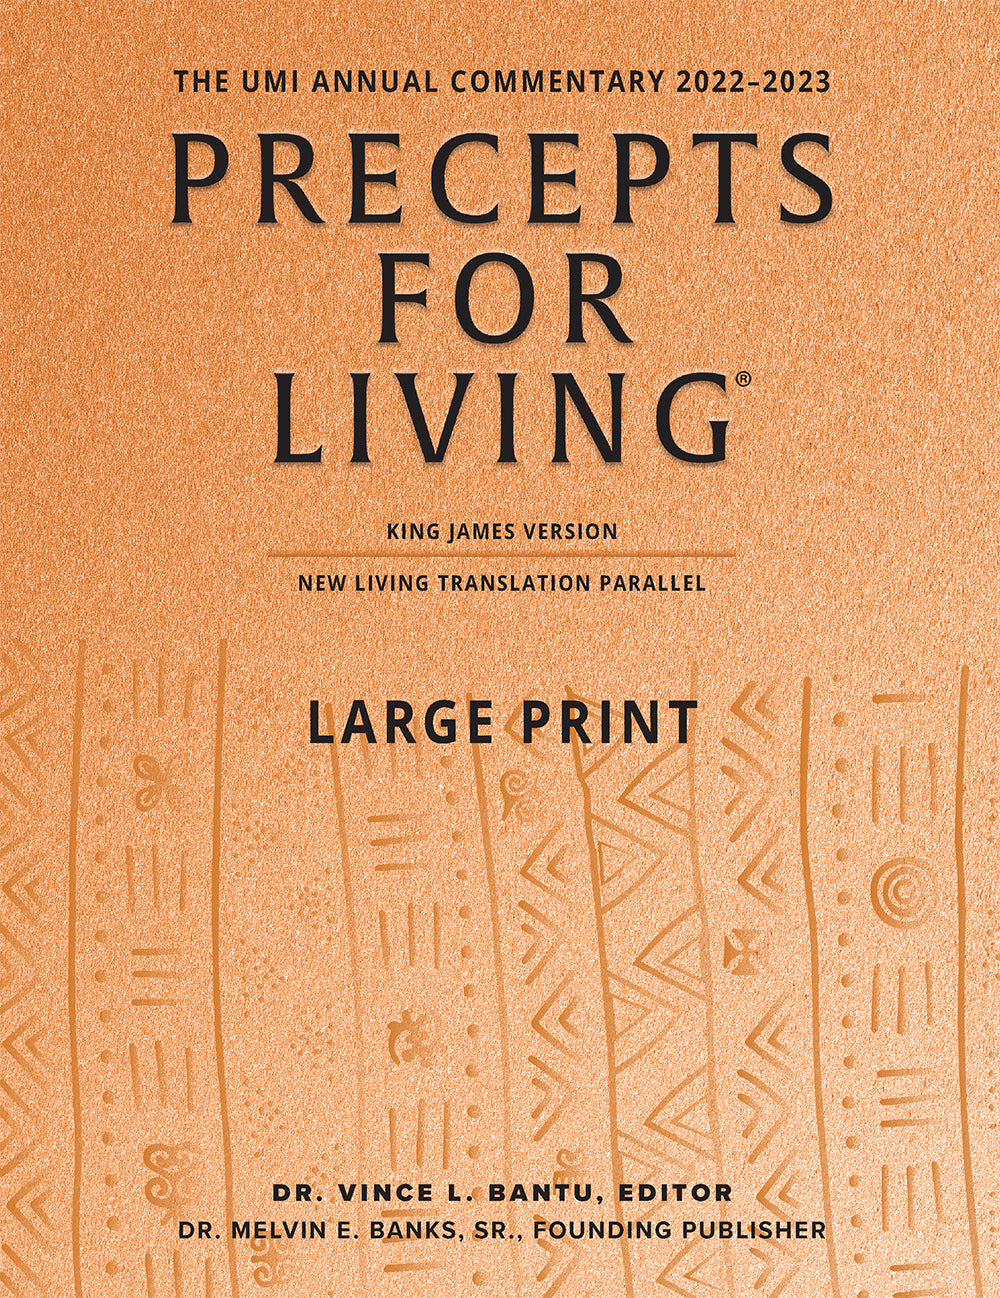 Precepts For Living LARGE PRINT 2022-2023